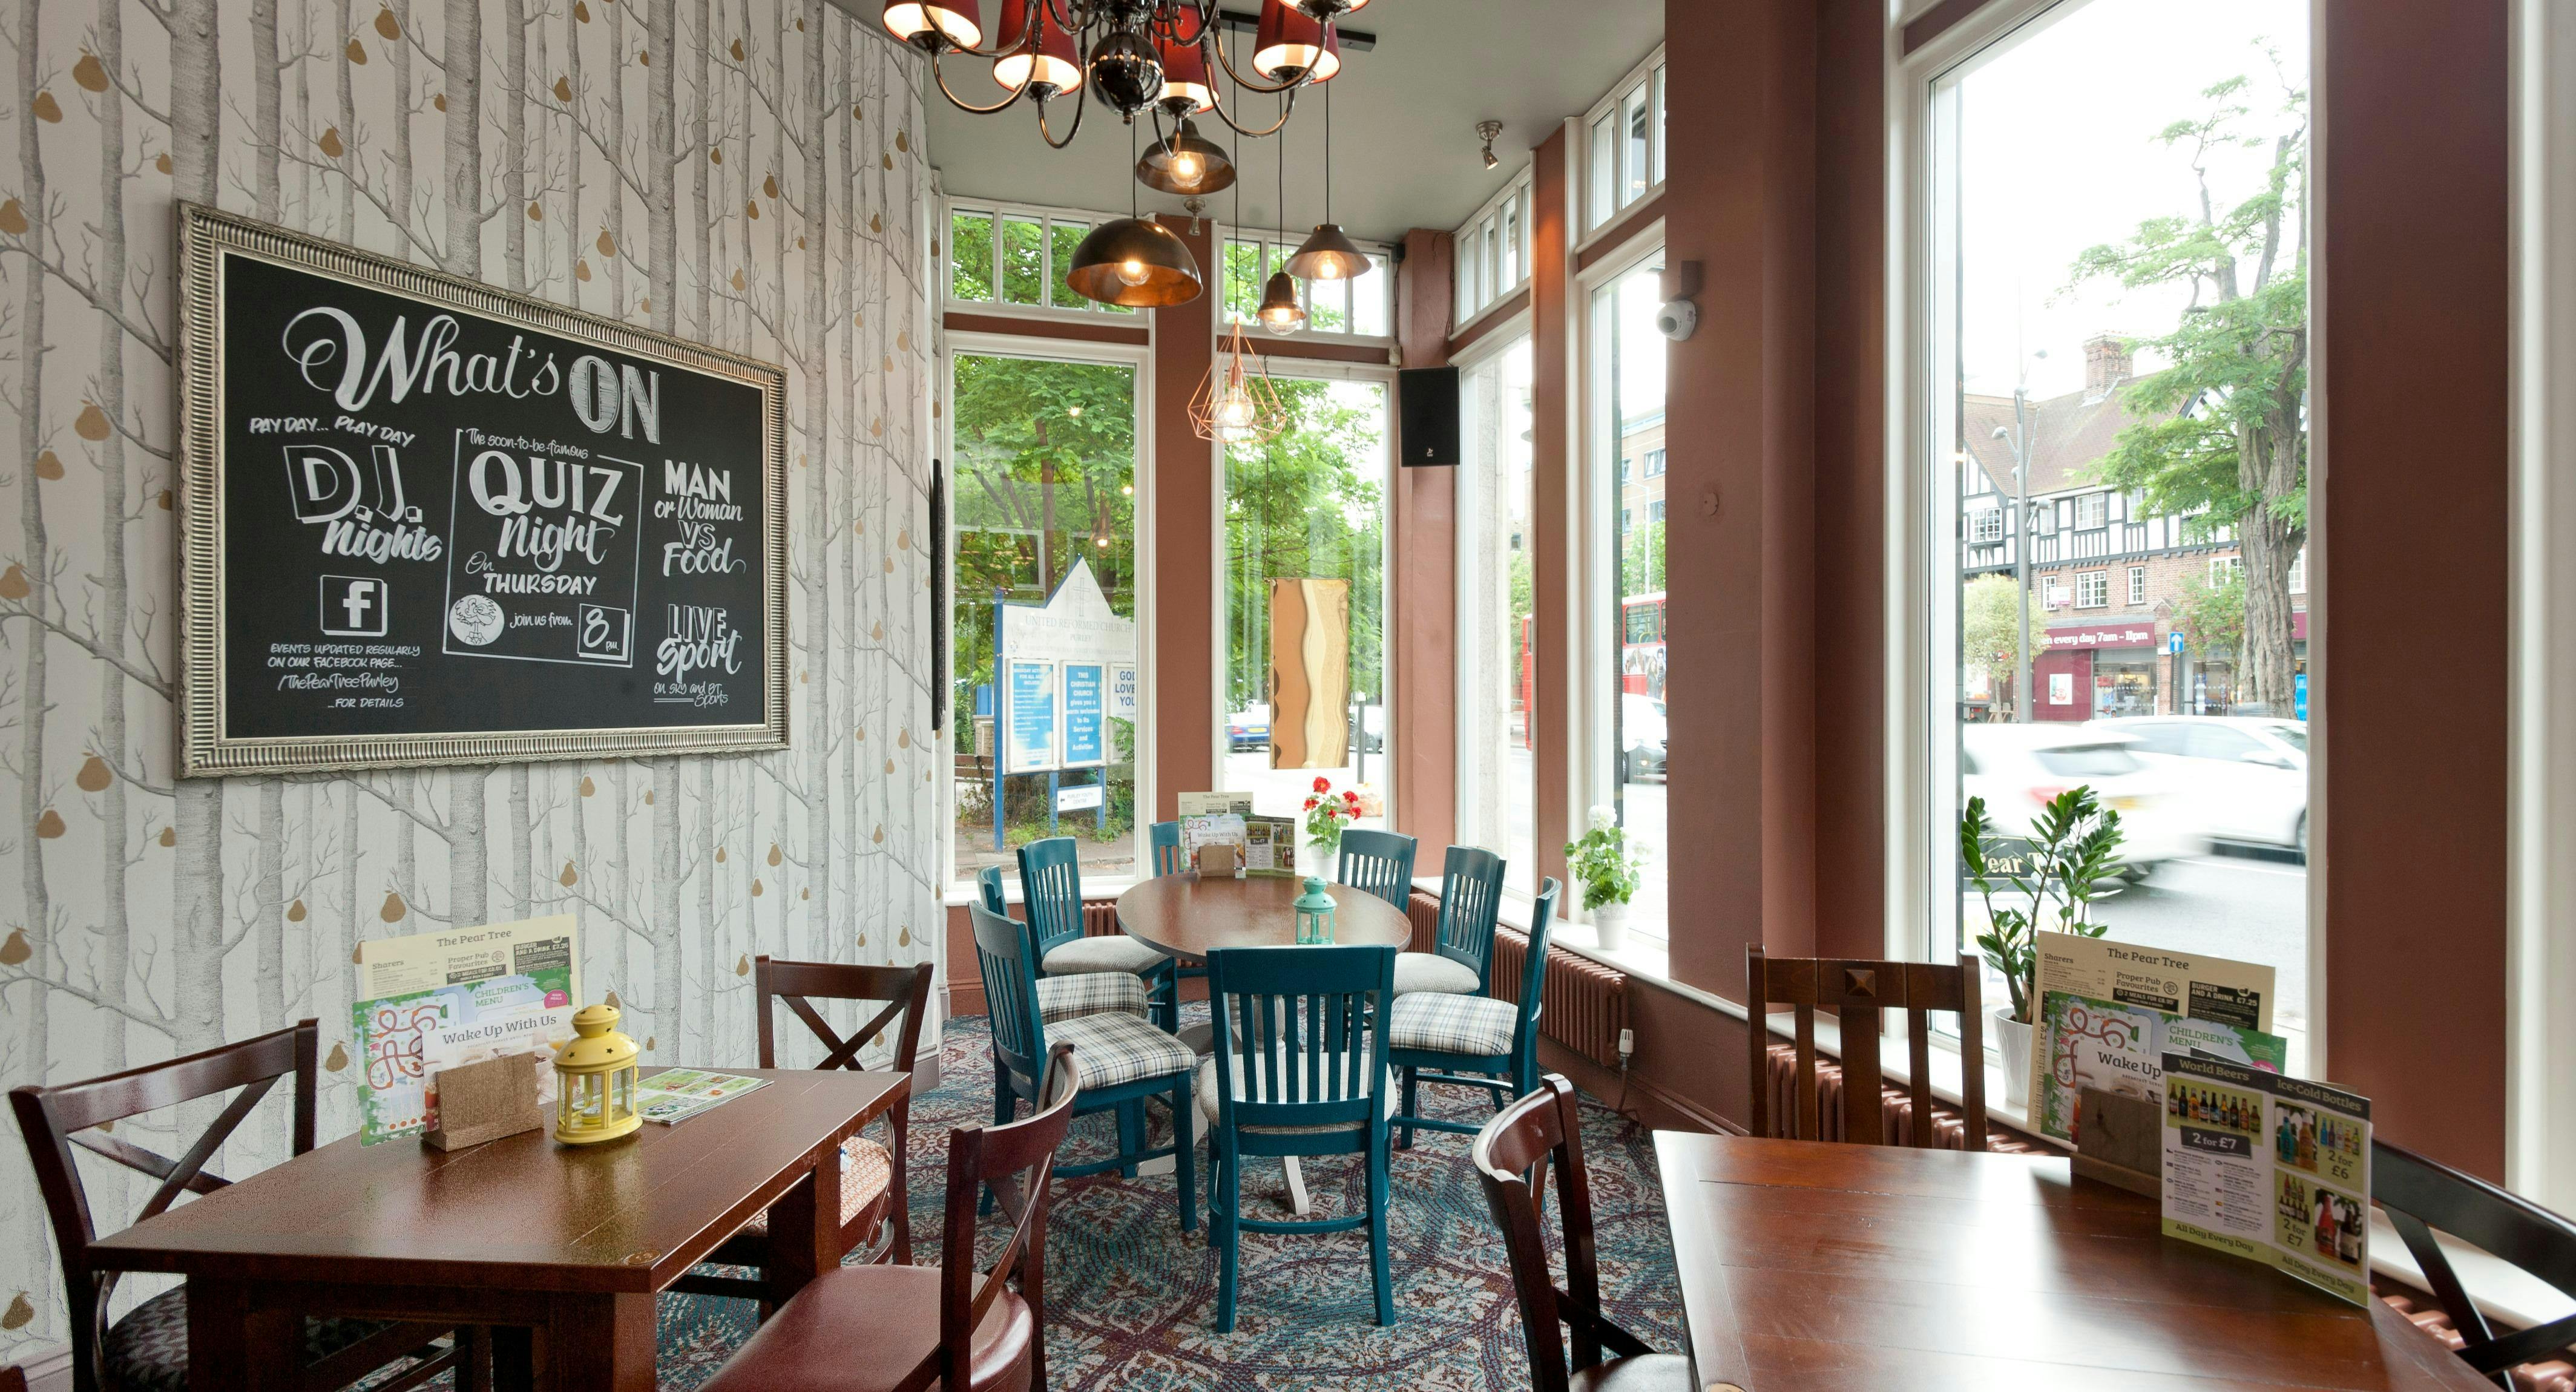 Photo of restaurant The Pear Tree Purley in Purley, Croydon